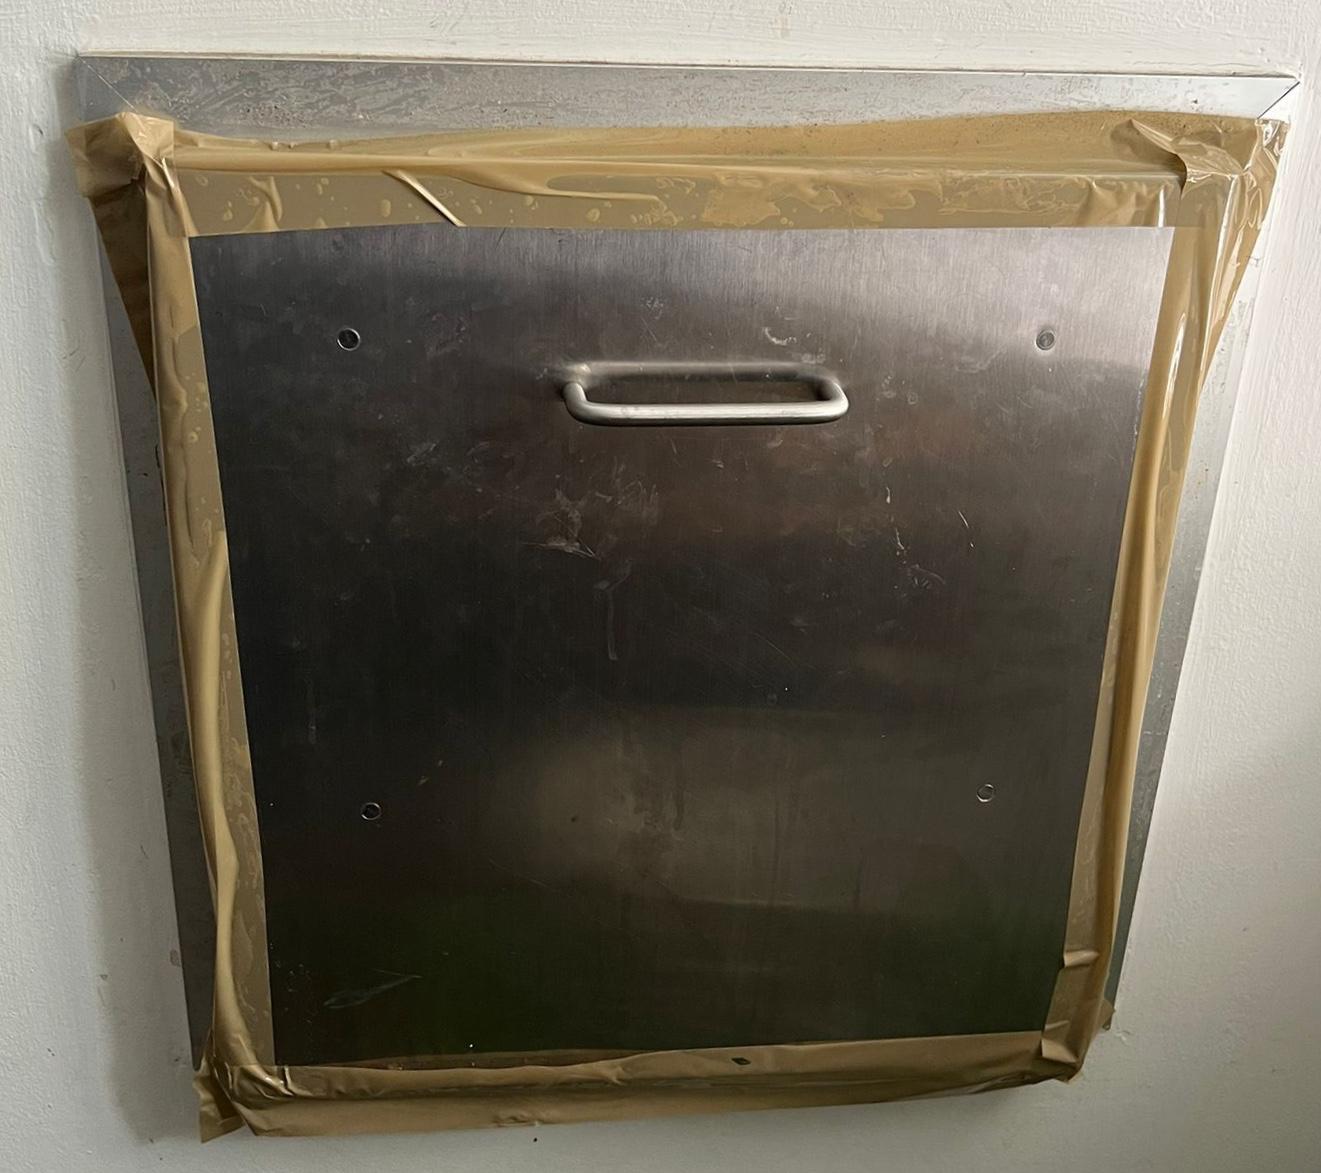 Rubbish Chute Replacement In Amber